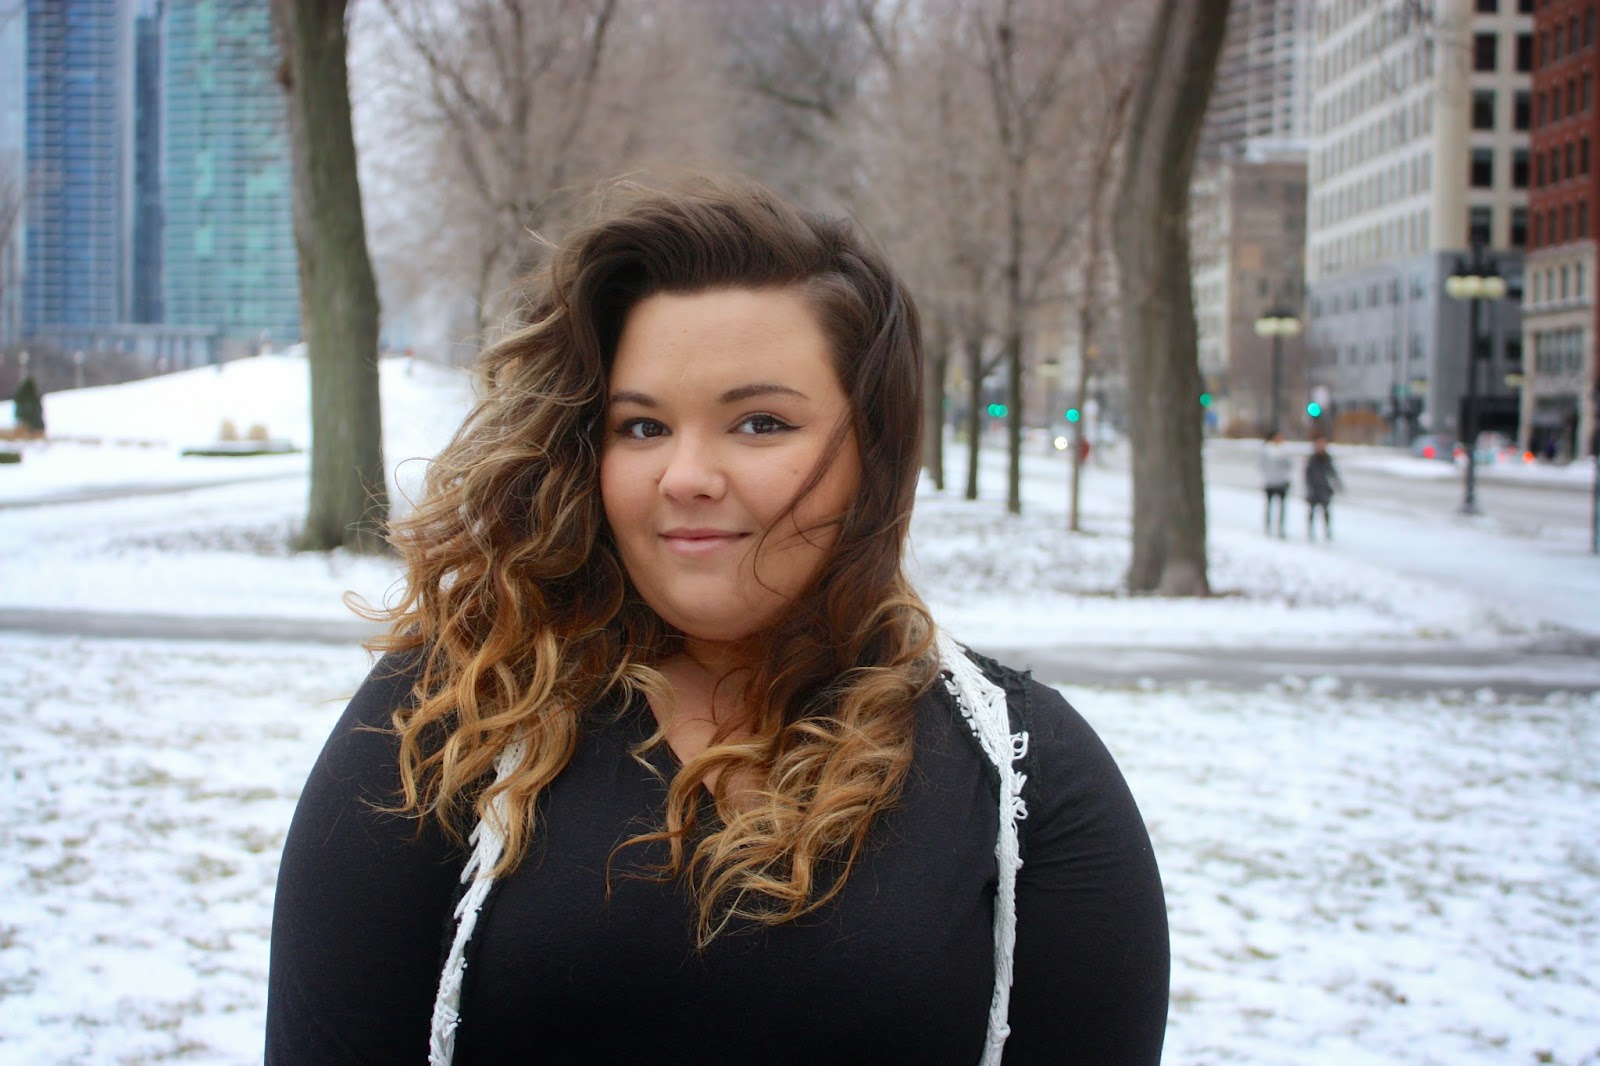 Natalie Craig, Natalie in The City, chicago, ootd, plus size fashion, fashion blogger, crochet vest, winter fashion 2015, mom fashion, curvy women, fatshion, gray jeans, curly ombre hair, thick girls, grant park, ralph lauren, lauren, wide calf boots, how to dress up a long sleeve shirt